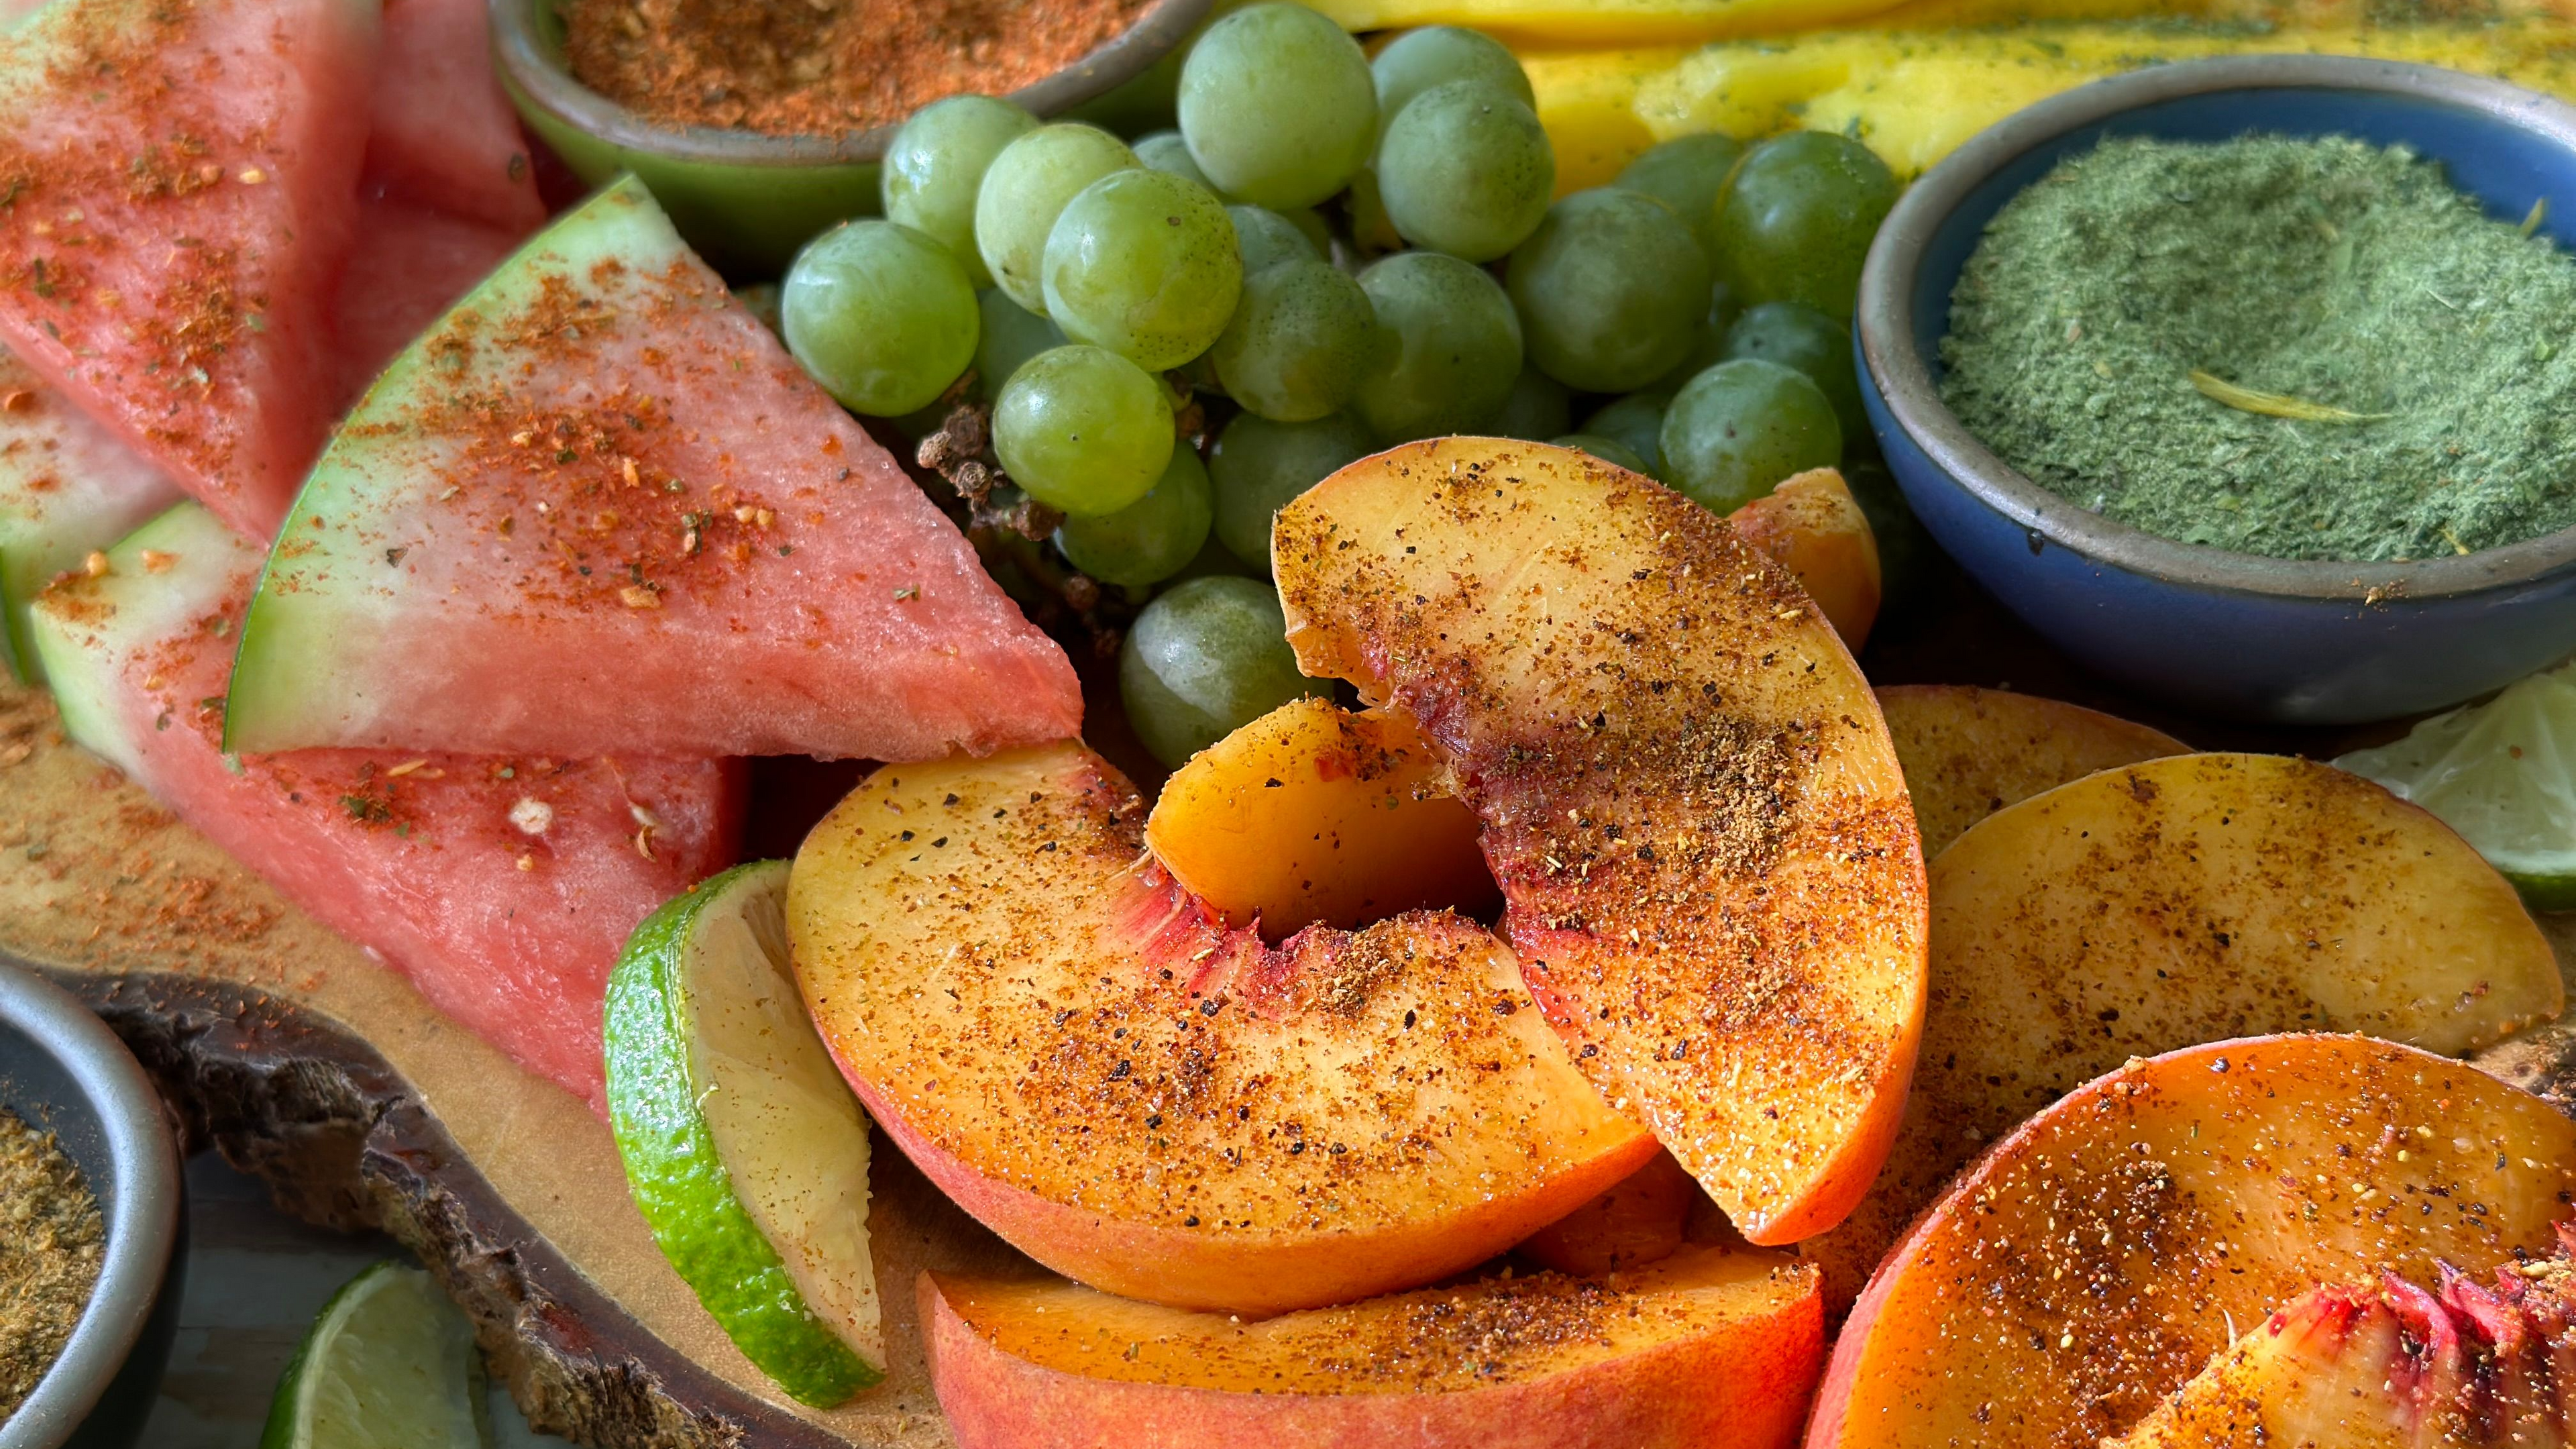 Spice up your Summer fruits!